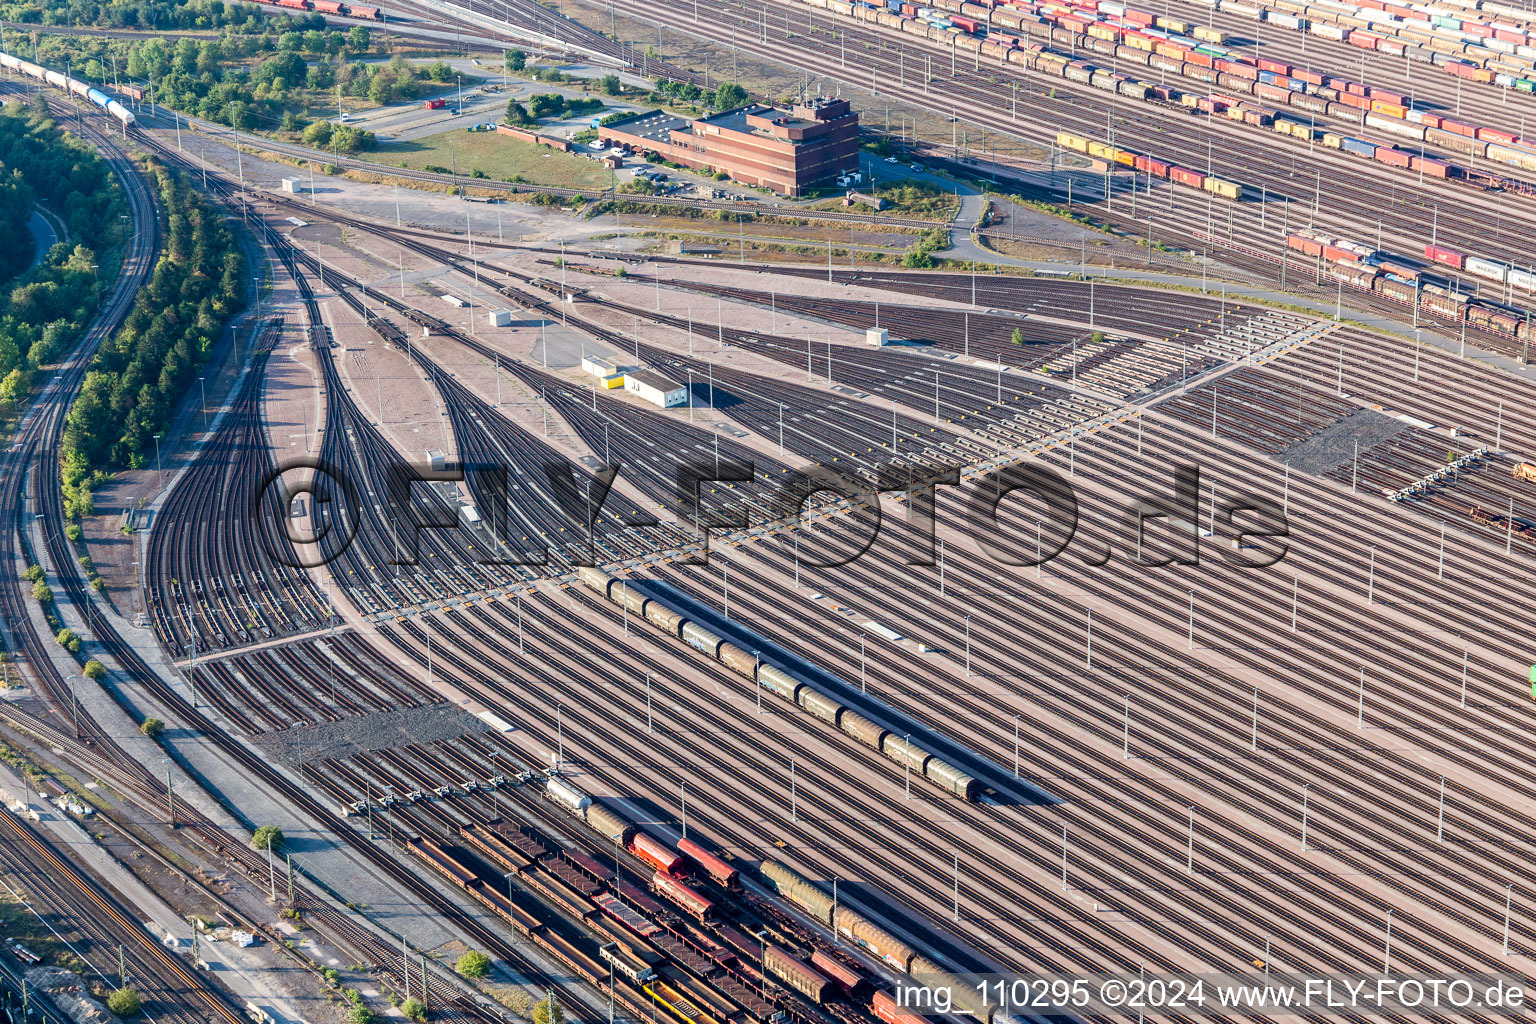 Marshalling yard and freight station Maschen of the Deutsche Bahn in the district Maschen in Seevetal in the state Lower Saxony, Germany from the plane